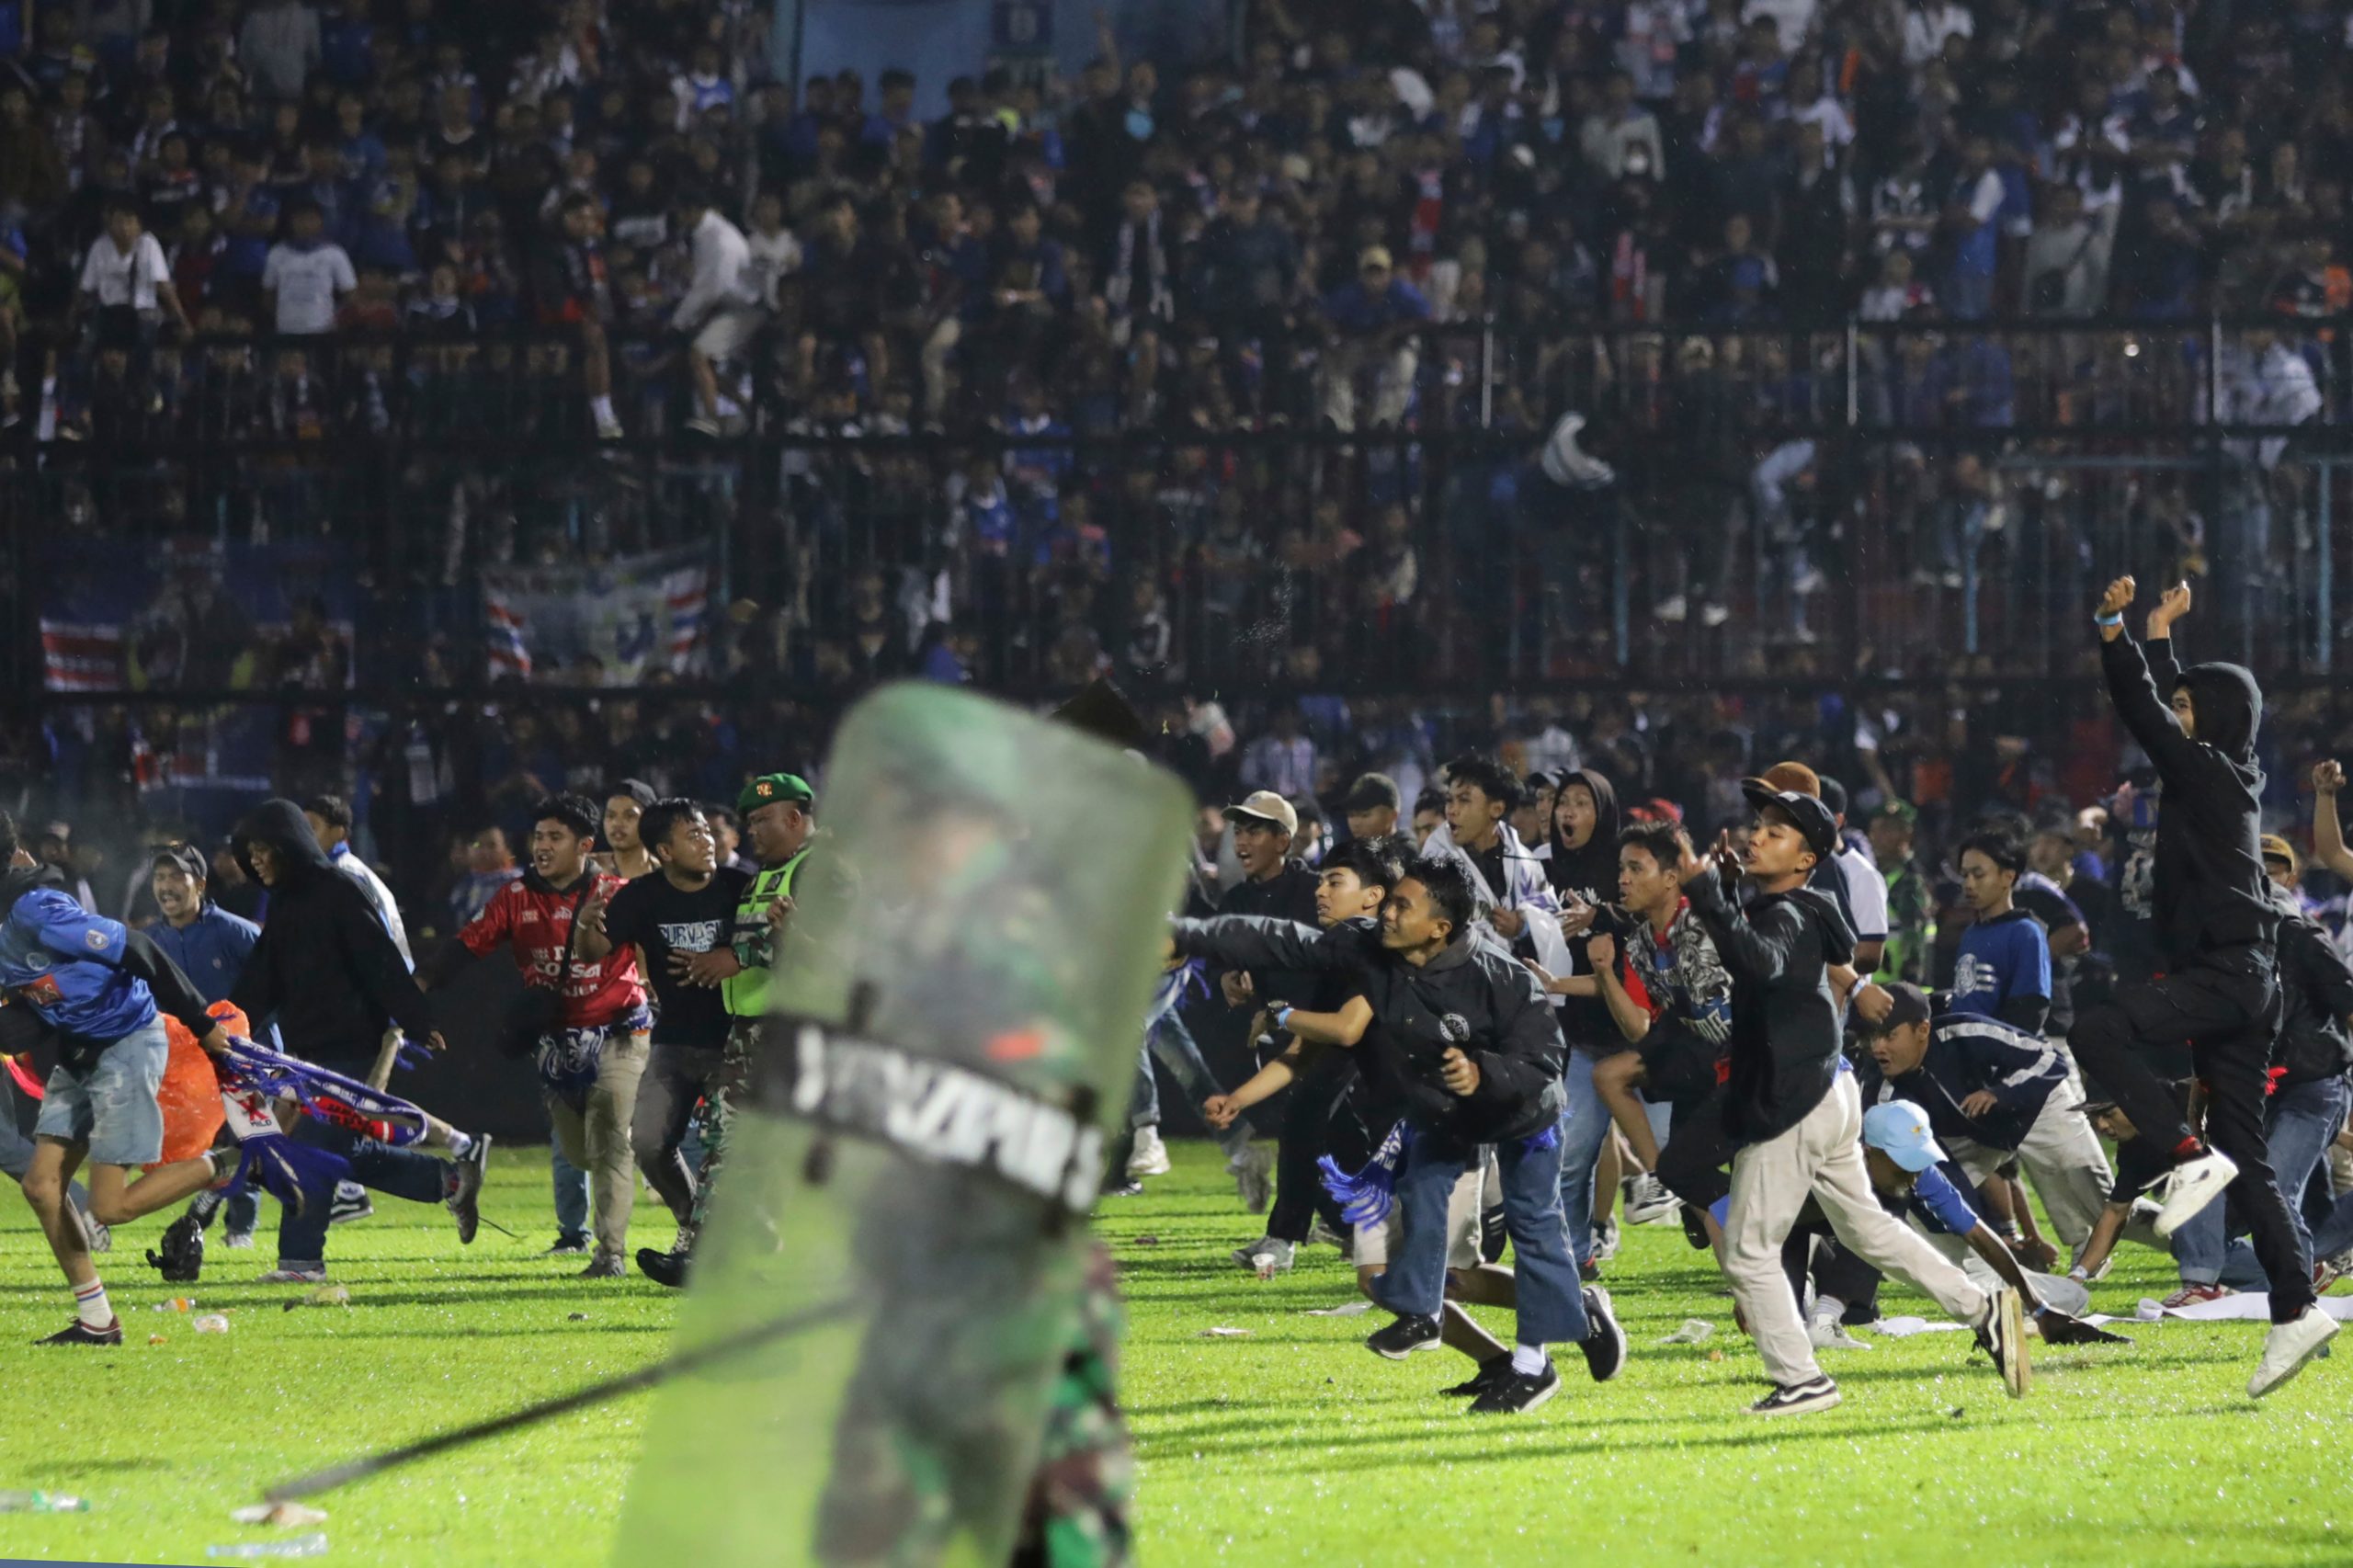 Indonesia’s history of football violence